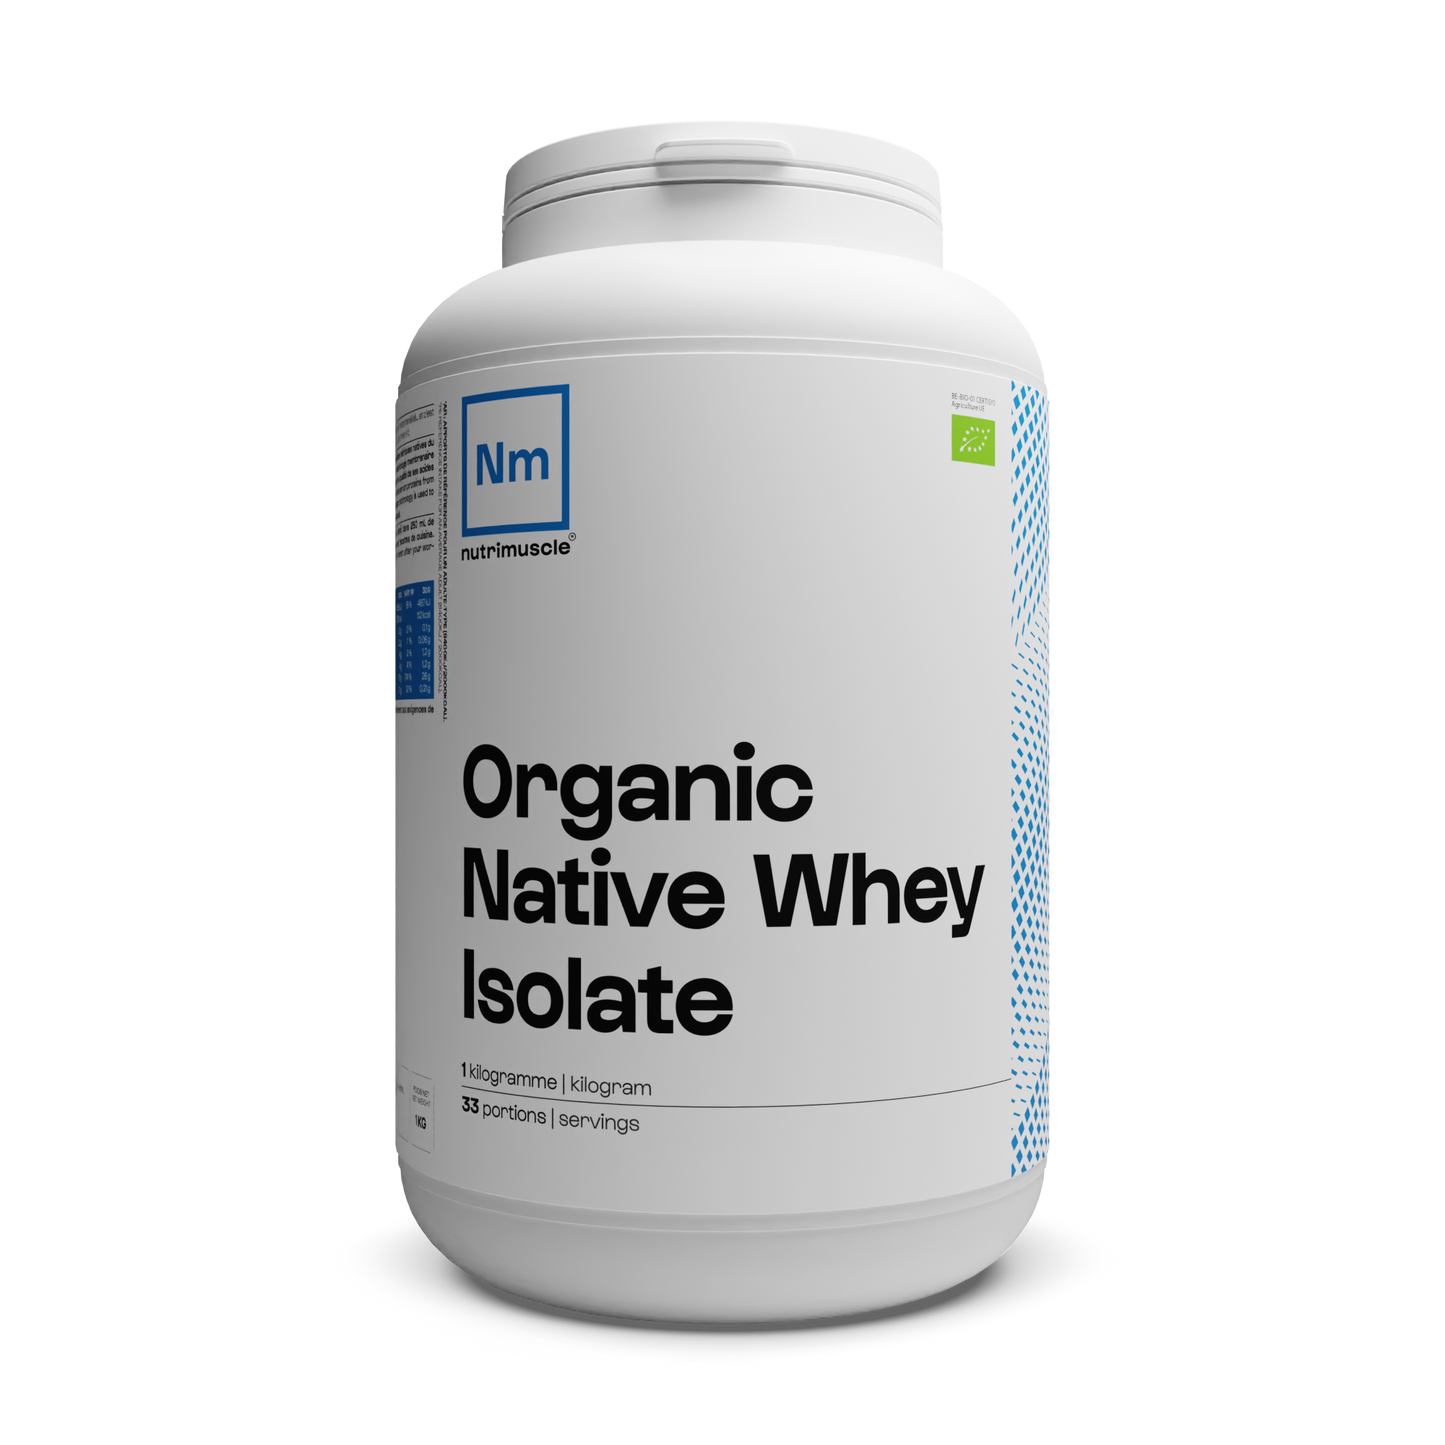 Whey Native Isolate Biologique